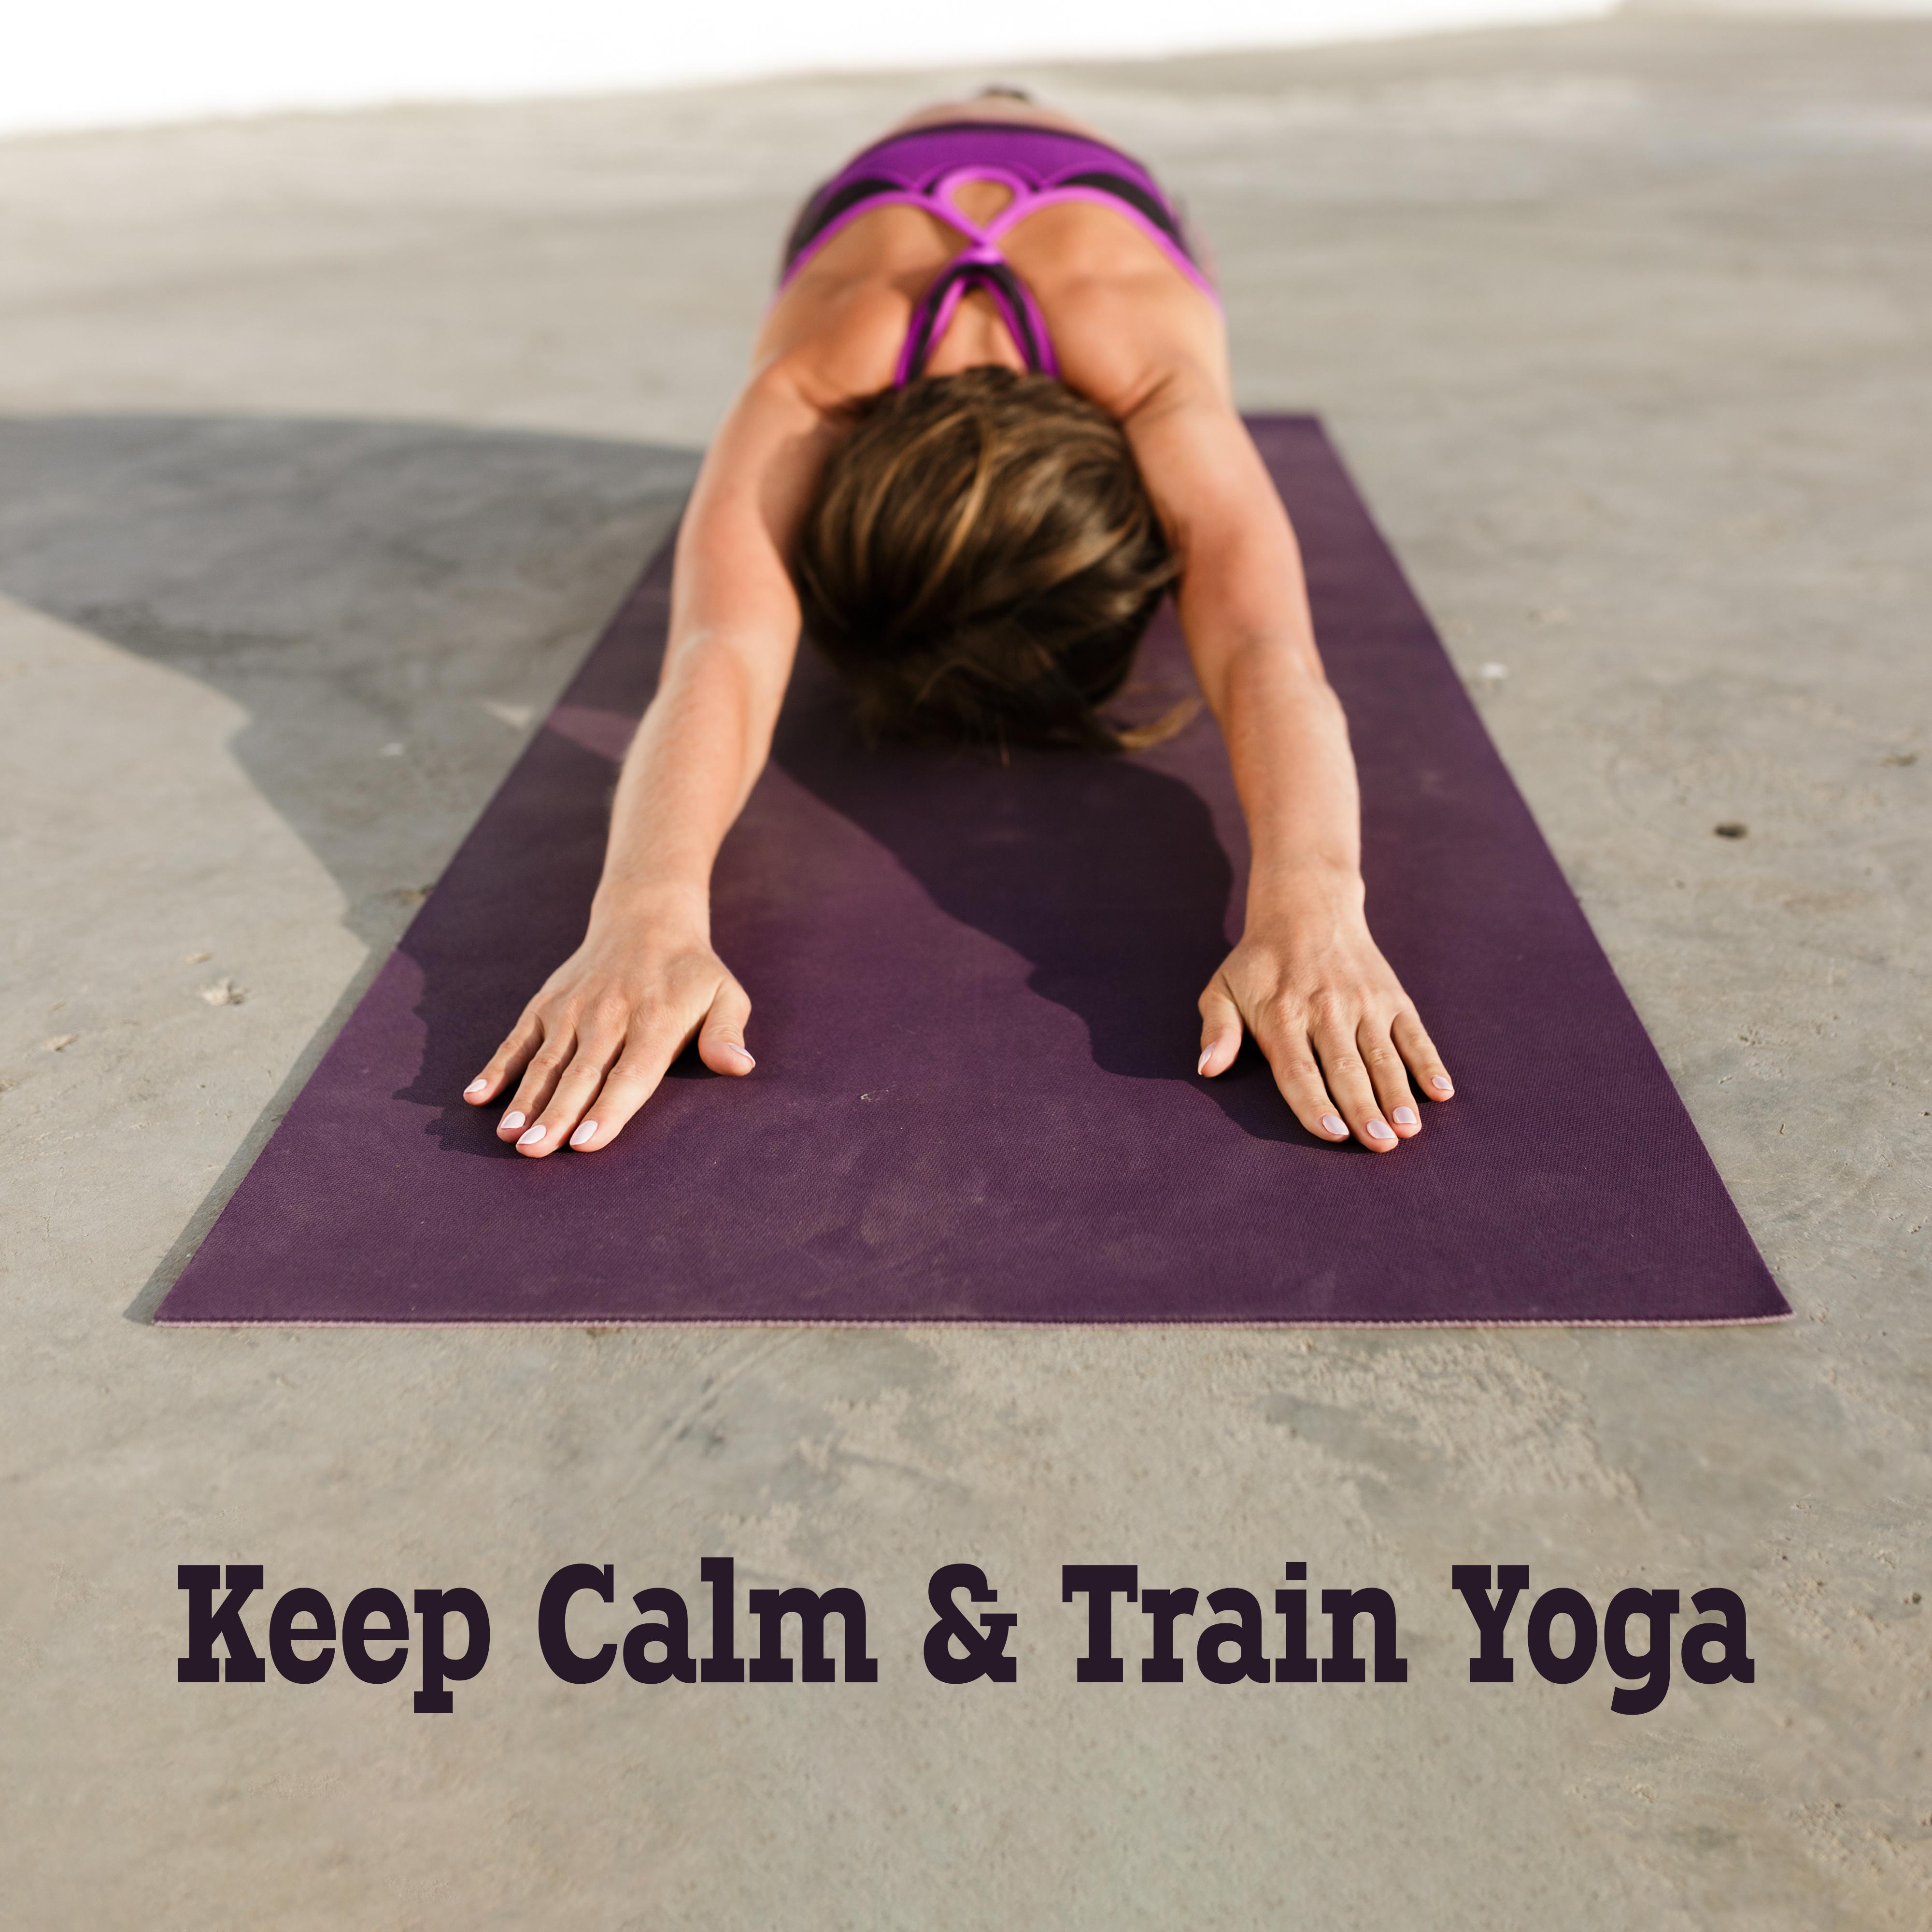 Keep Calm & Train Yoga: 2019 New Age Music for Meditation & Relaxation, Positive Energy for Yoga Poses Training, Open Your Mind, Relax Your Body, Vital Energy Increase